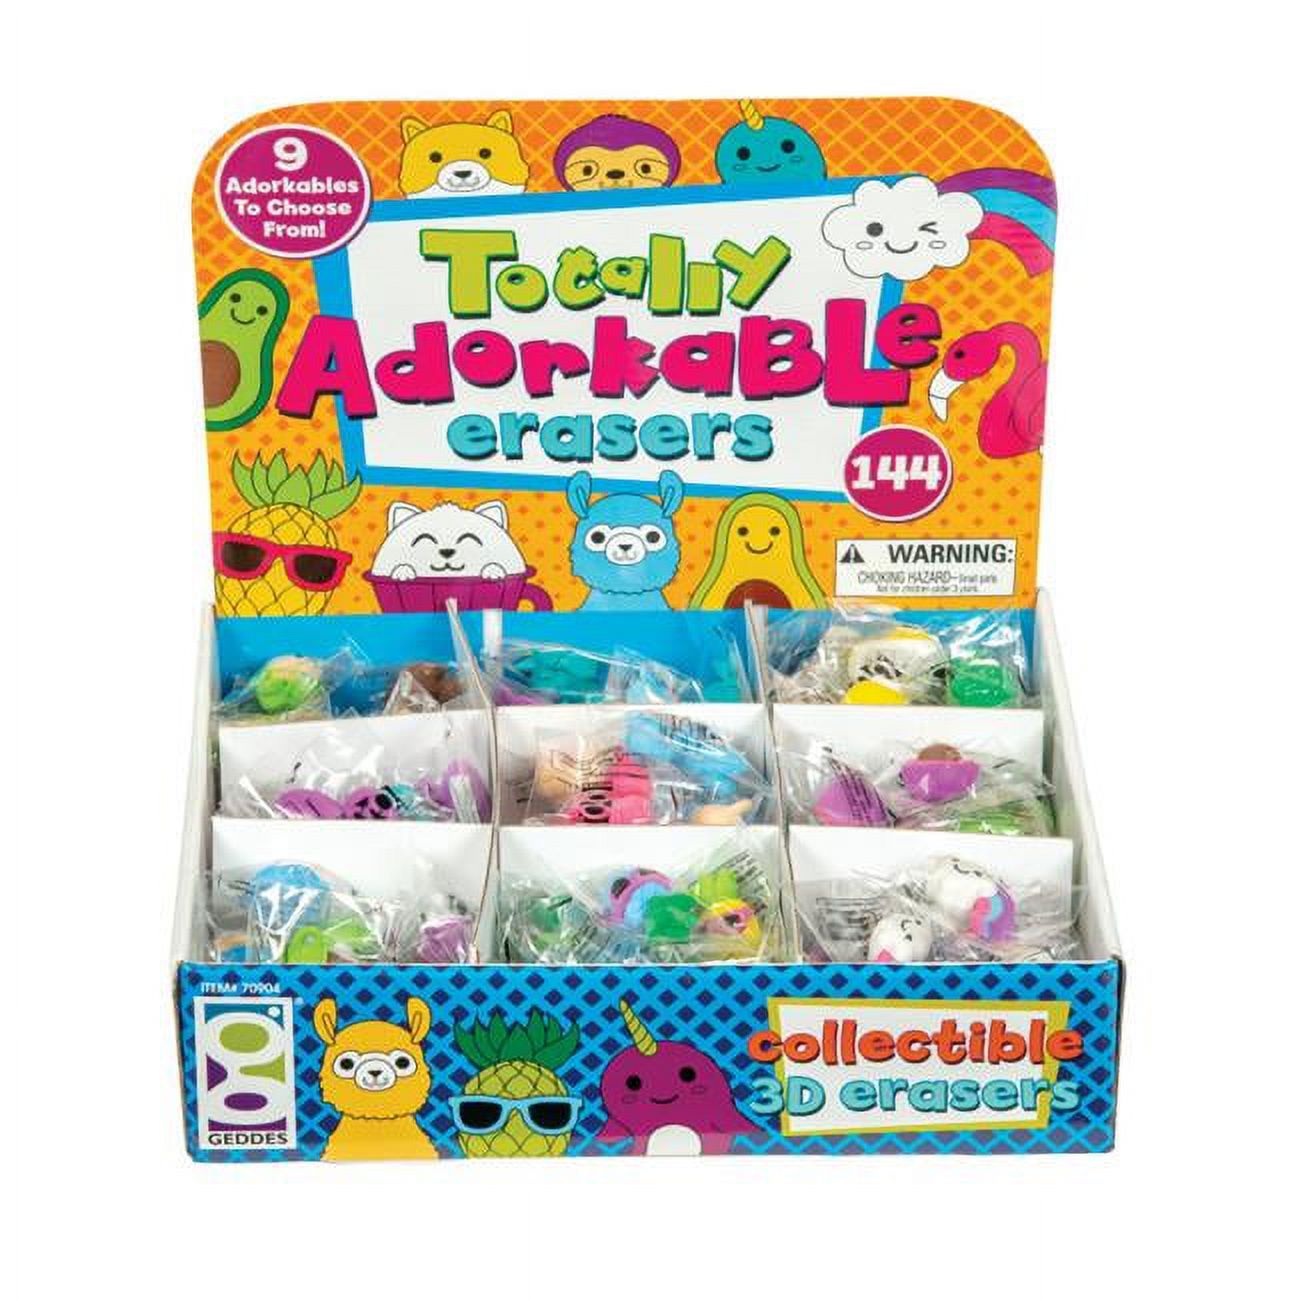 2339321 Totally Adorkable Erasers In A Display, Case Of 144 - Case Of 144